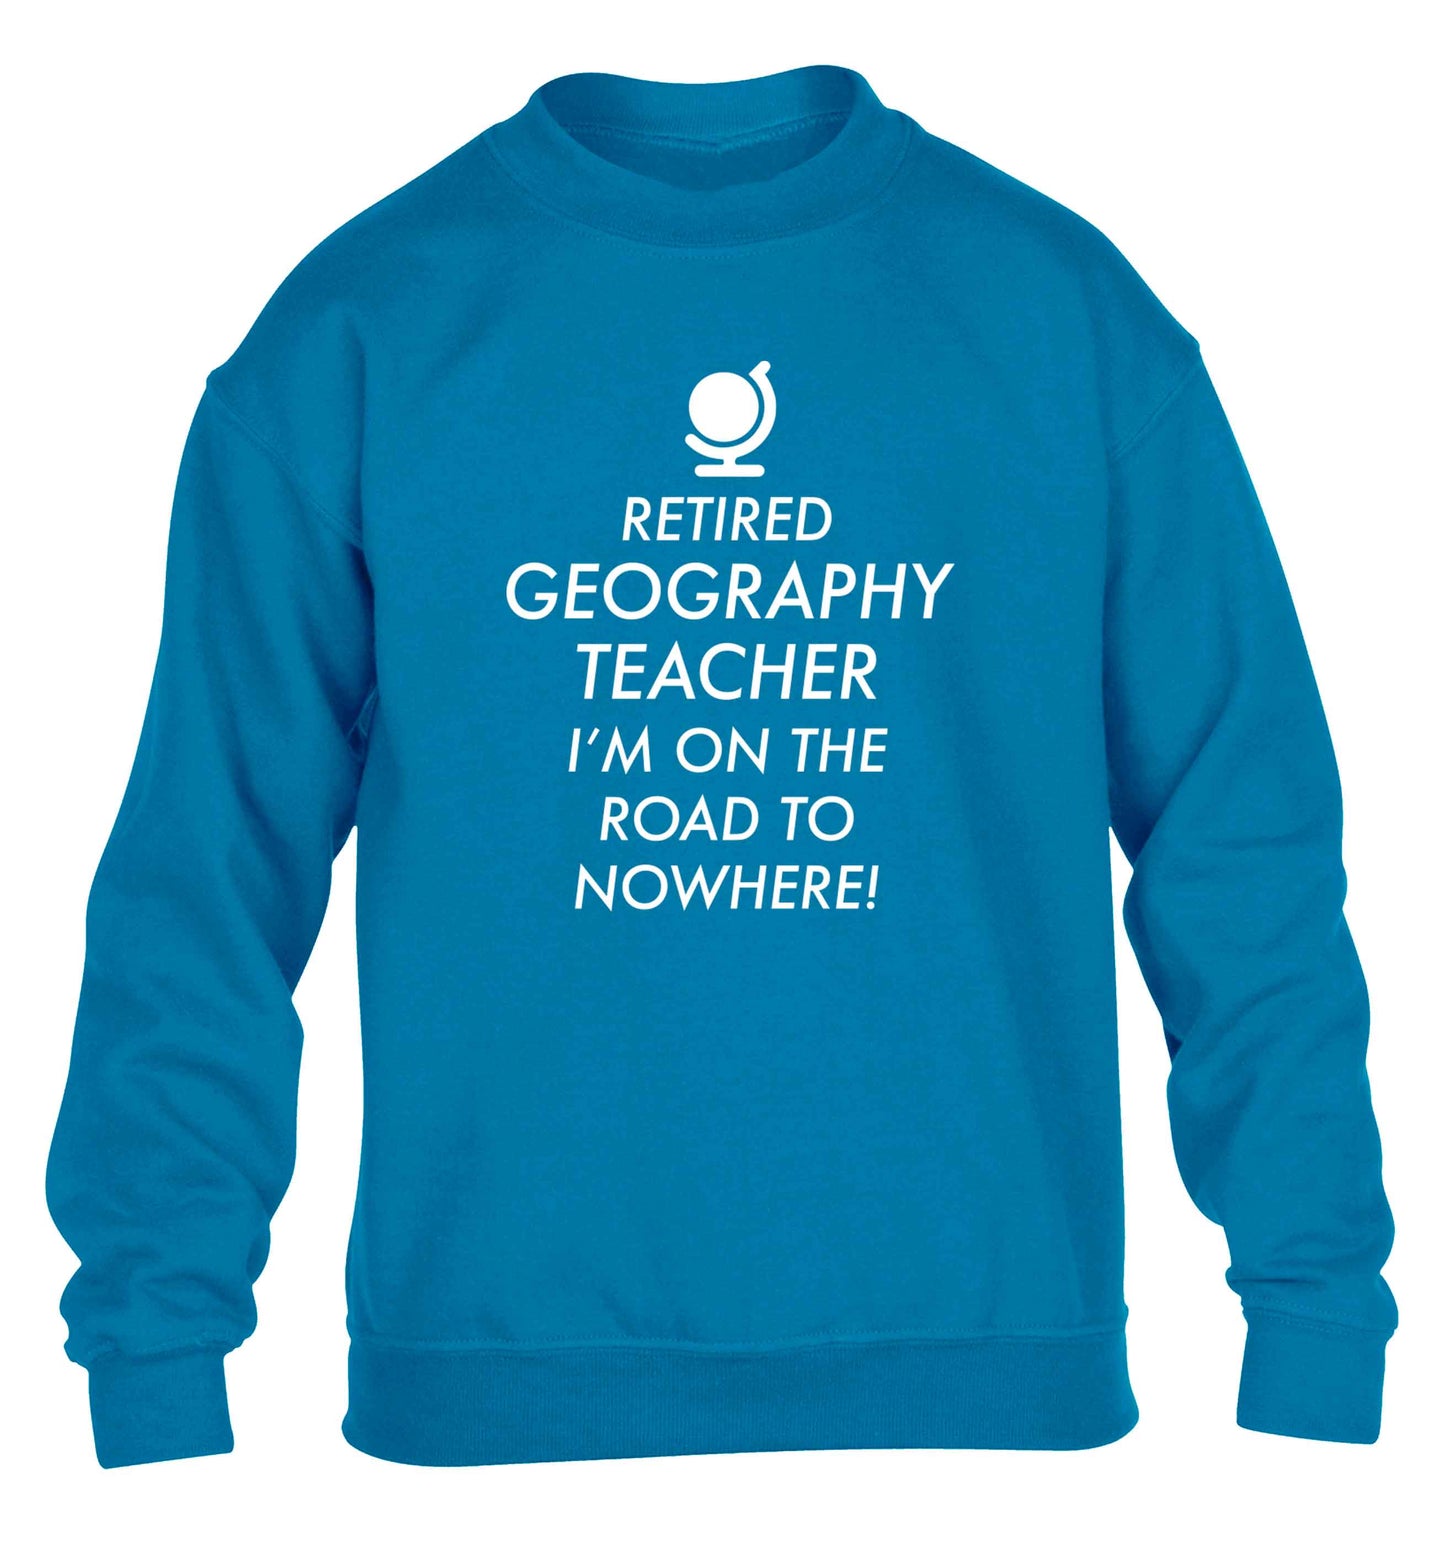 Retired geography teacher I'm on the road to nowhere children's blue sweater 12-13 Years